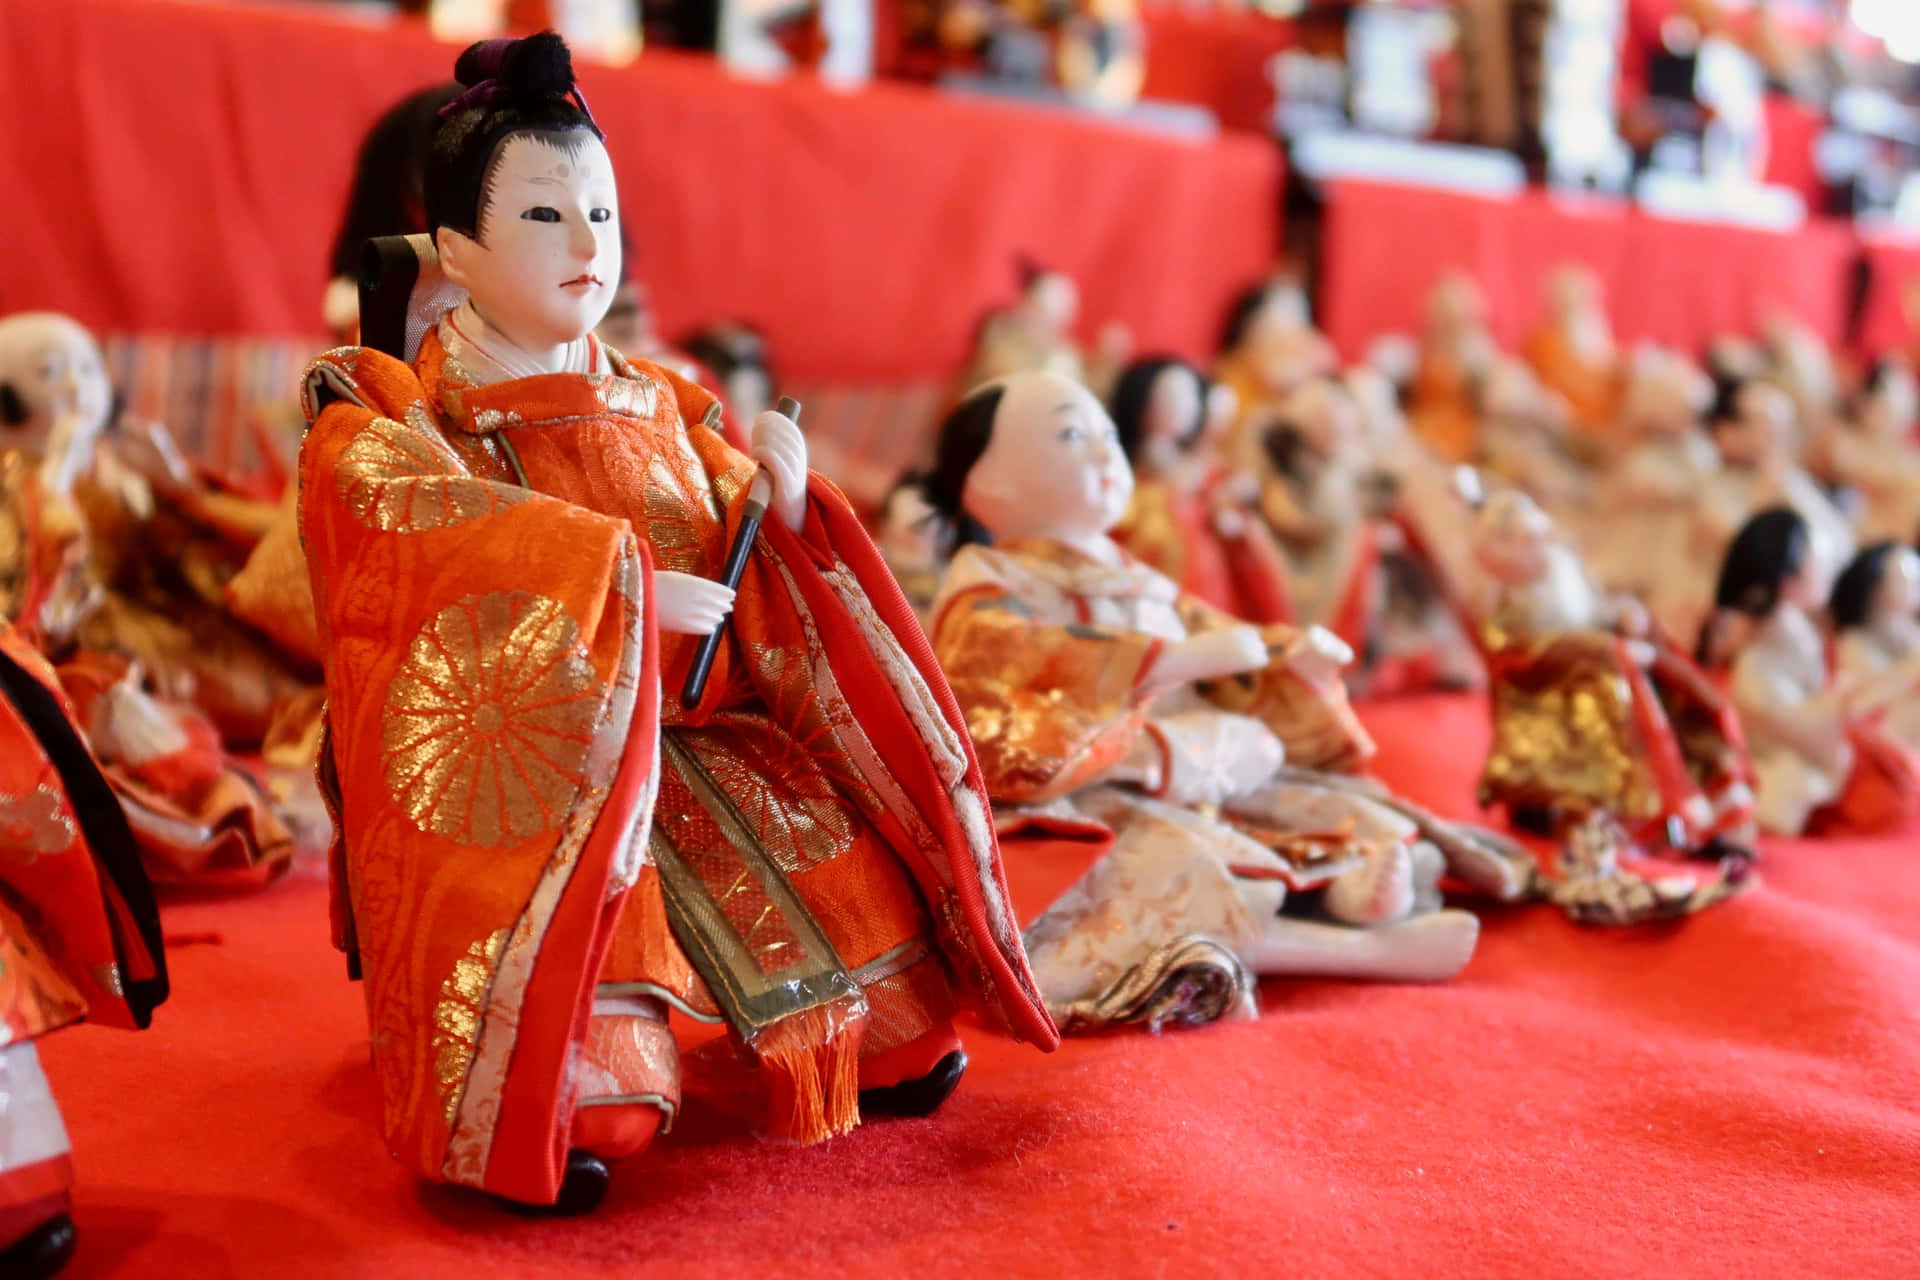 A Variety of Dolls of Different Shapes and Sizes